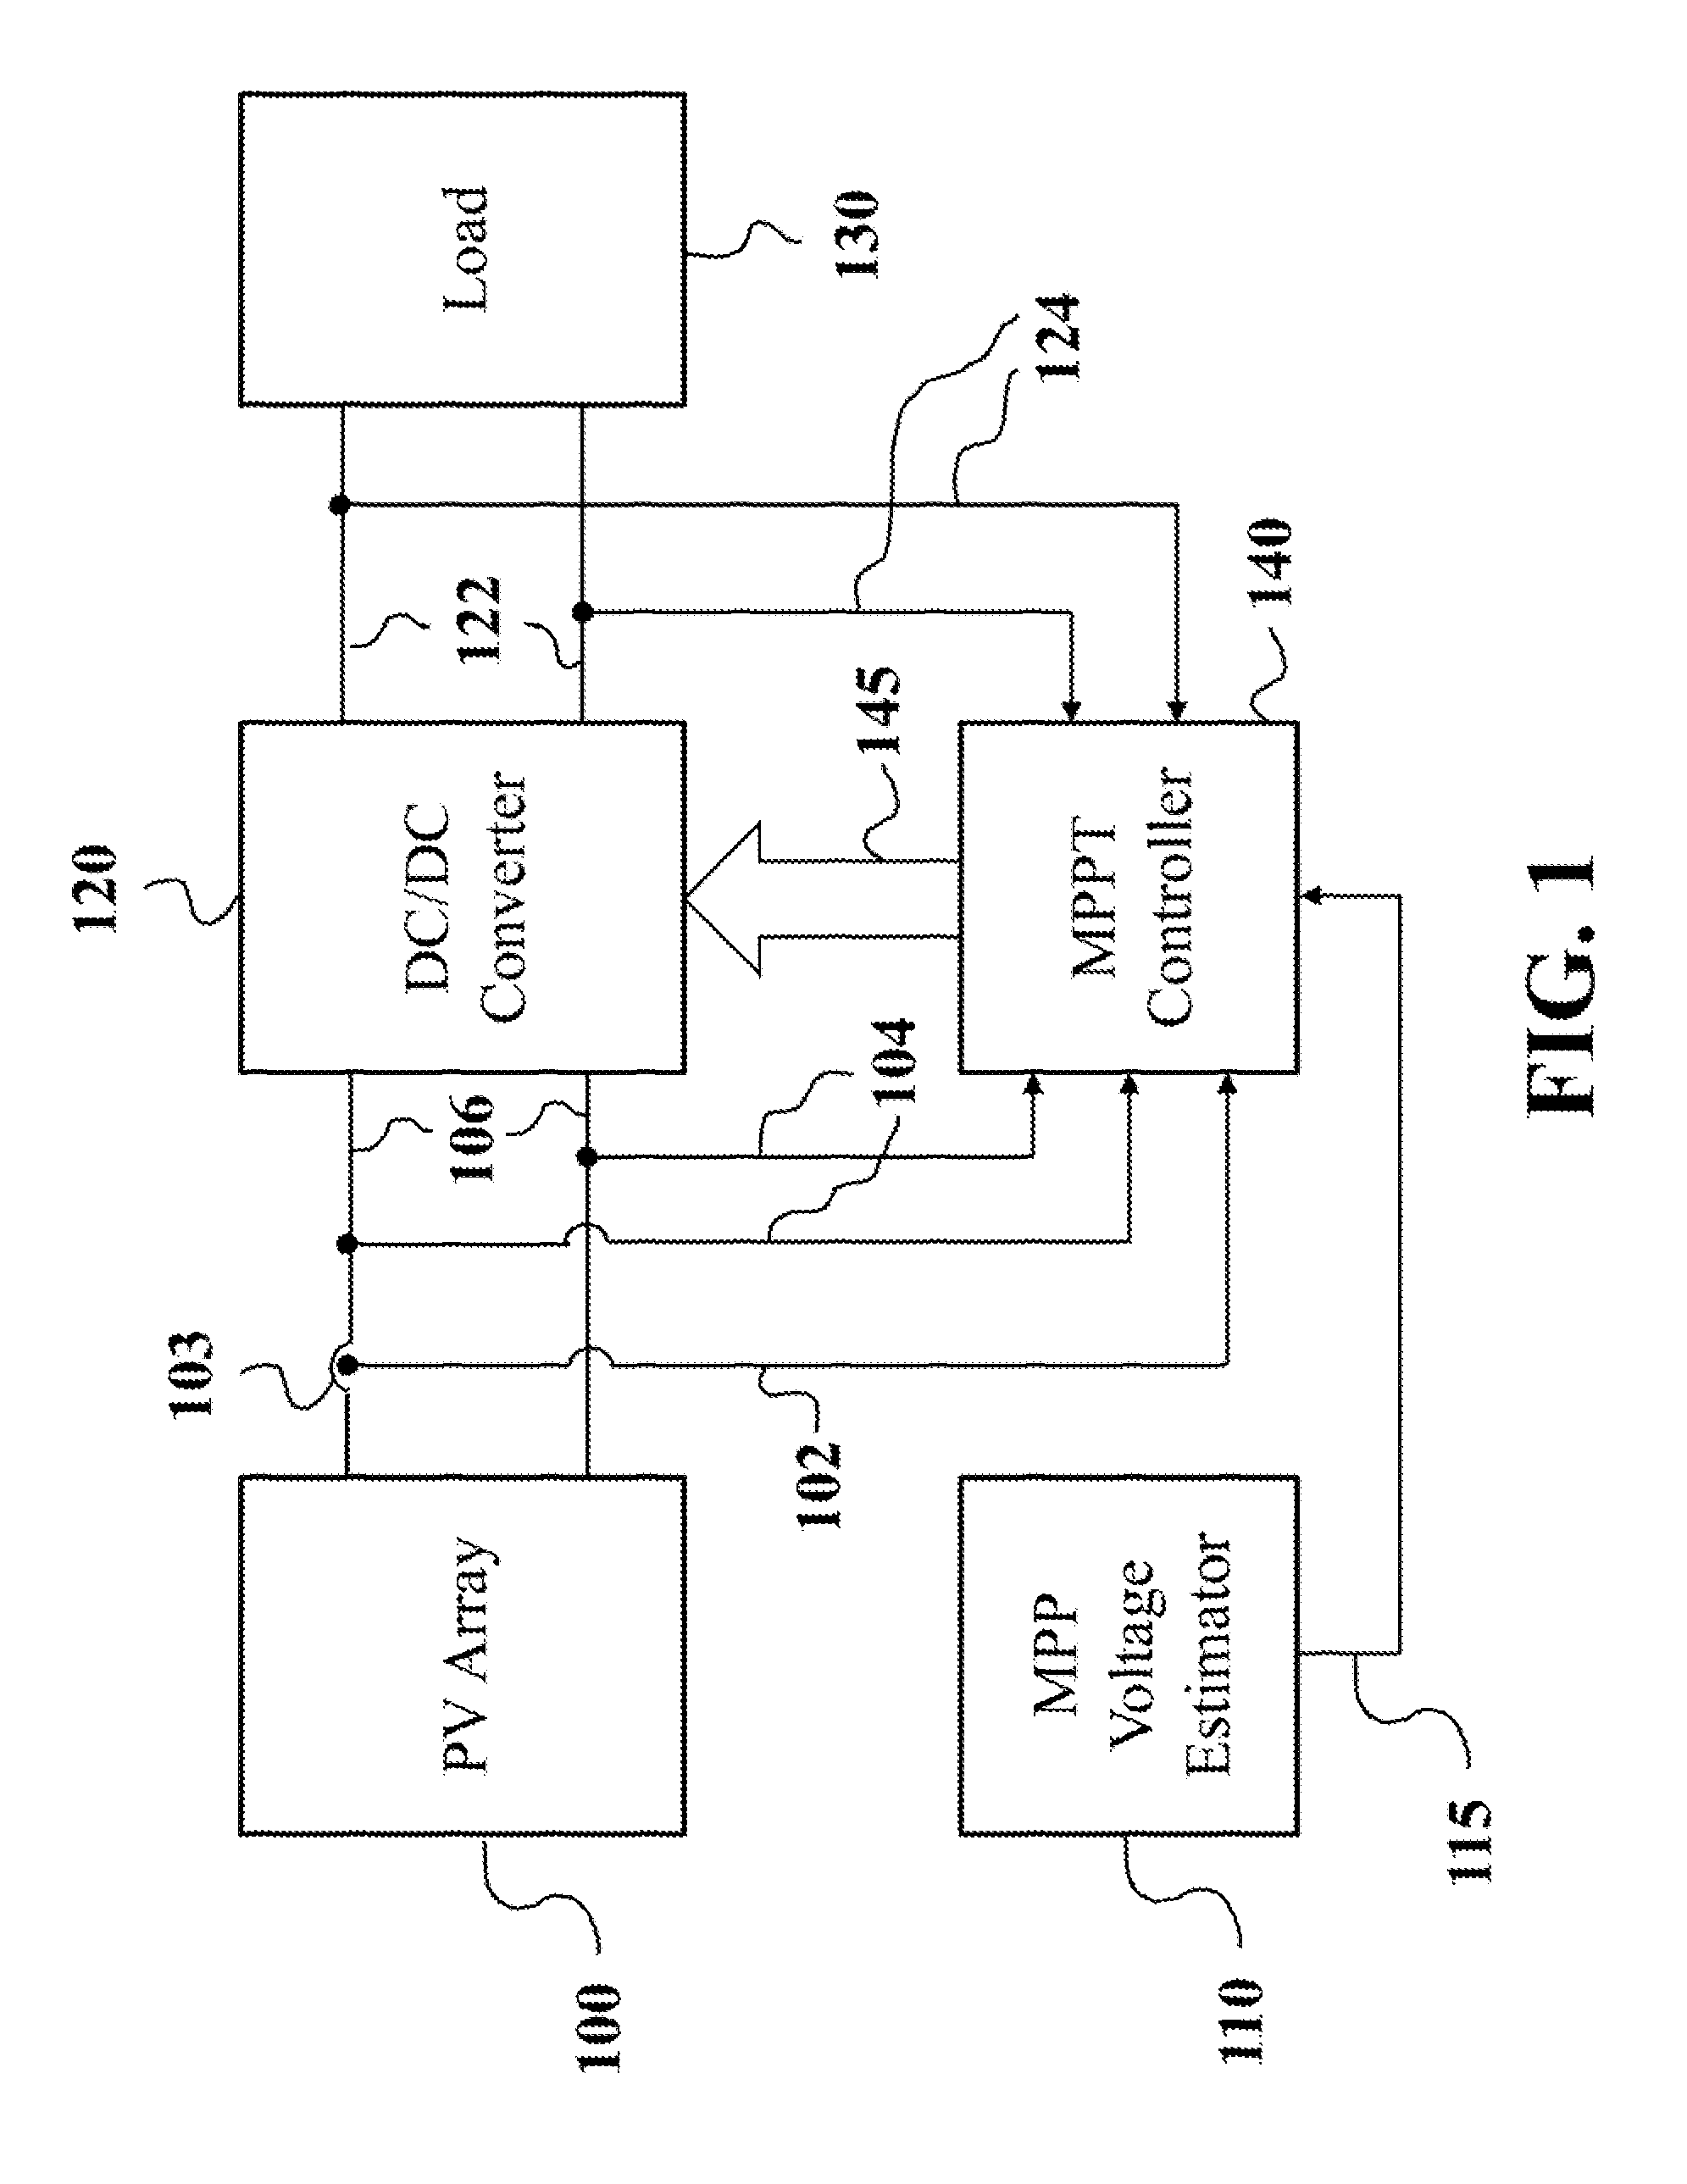 Maximum power point tracking for photovoltaic power generation system